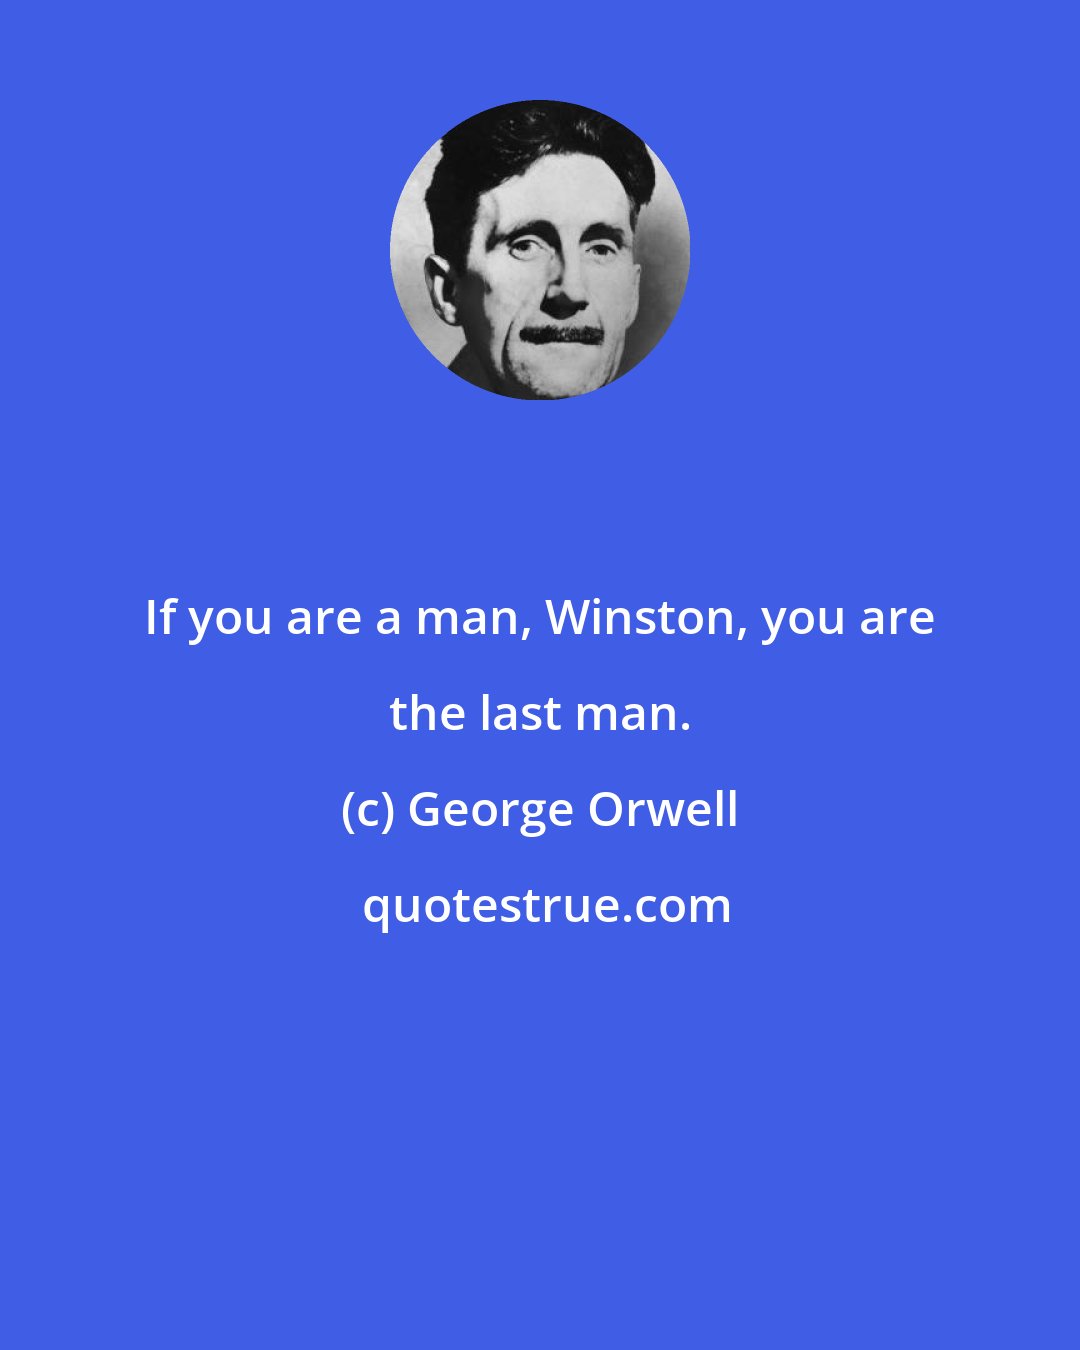 George Orwell: If you are a man, Winston, you are the last man.